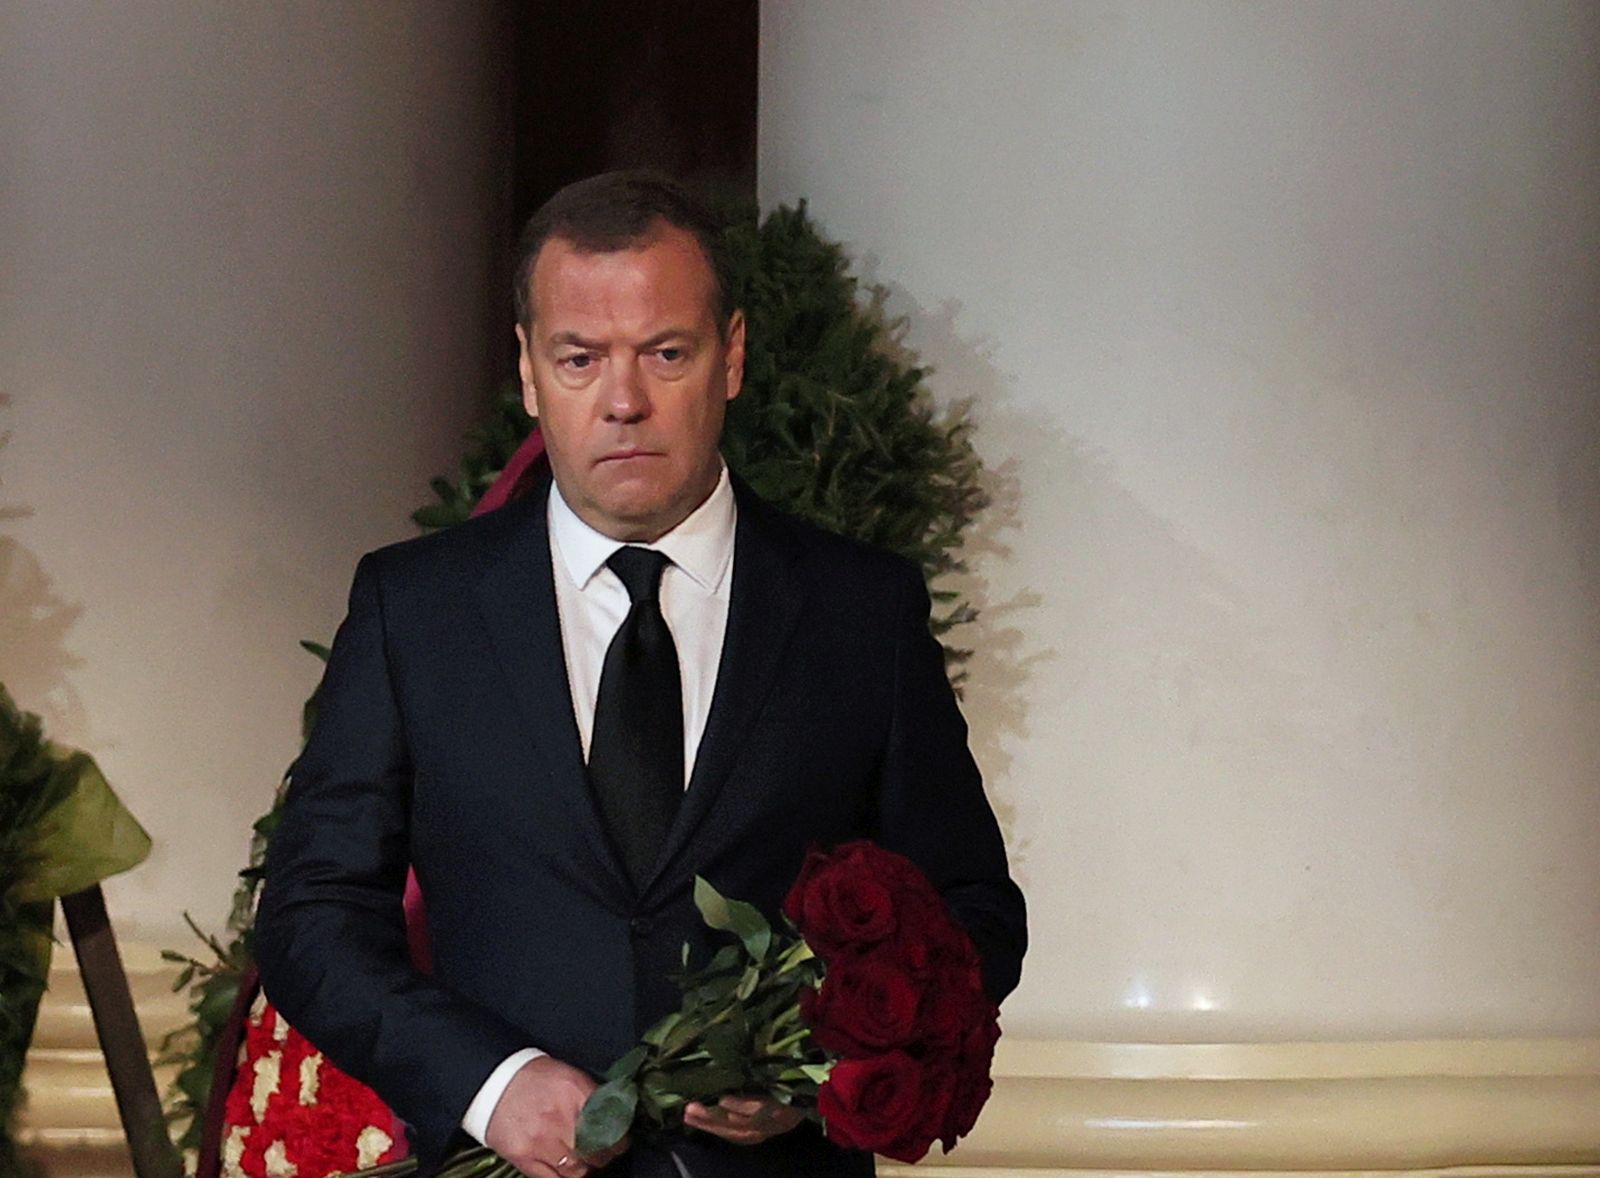 epa10156850 Deputy head of Russia's Security Council Dmitry Medvedev attends a farewell ceremony of the late former Soviet president Mikhail Gorbachev at the Hall of Columns of the House of Trade Unions in Moscow, Russia, 03 September 2022. Former Soviet leader Mikhail Gorbachev died on 30 August 2022 at the age of 91 in Moscow Central Clinical Hospital. Gorbachev initiated numerous reforms during his tenure. He signed a nuclear arms treaty with the United States and withdrew the Soviet Union from the Soviet-Afghan war. His policies created freedom of speech and press, and decentralized fiscal policy planning and execution to increase efficiency. Gorbachev was the last leader of the Soviet Union, overseeing Russia transition from one party rule to a fragile democracy. Gorbachev will be buried at the Novodevichy Cemetery in Moscow next to the grave of his wife Raisa.  EPA/EKATERINA SHTUKINA/SPUTNIK/KREMLIN POOL / POOL MANDATORY CREDIT